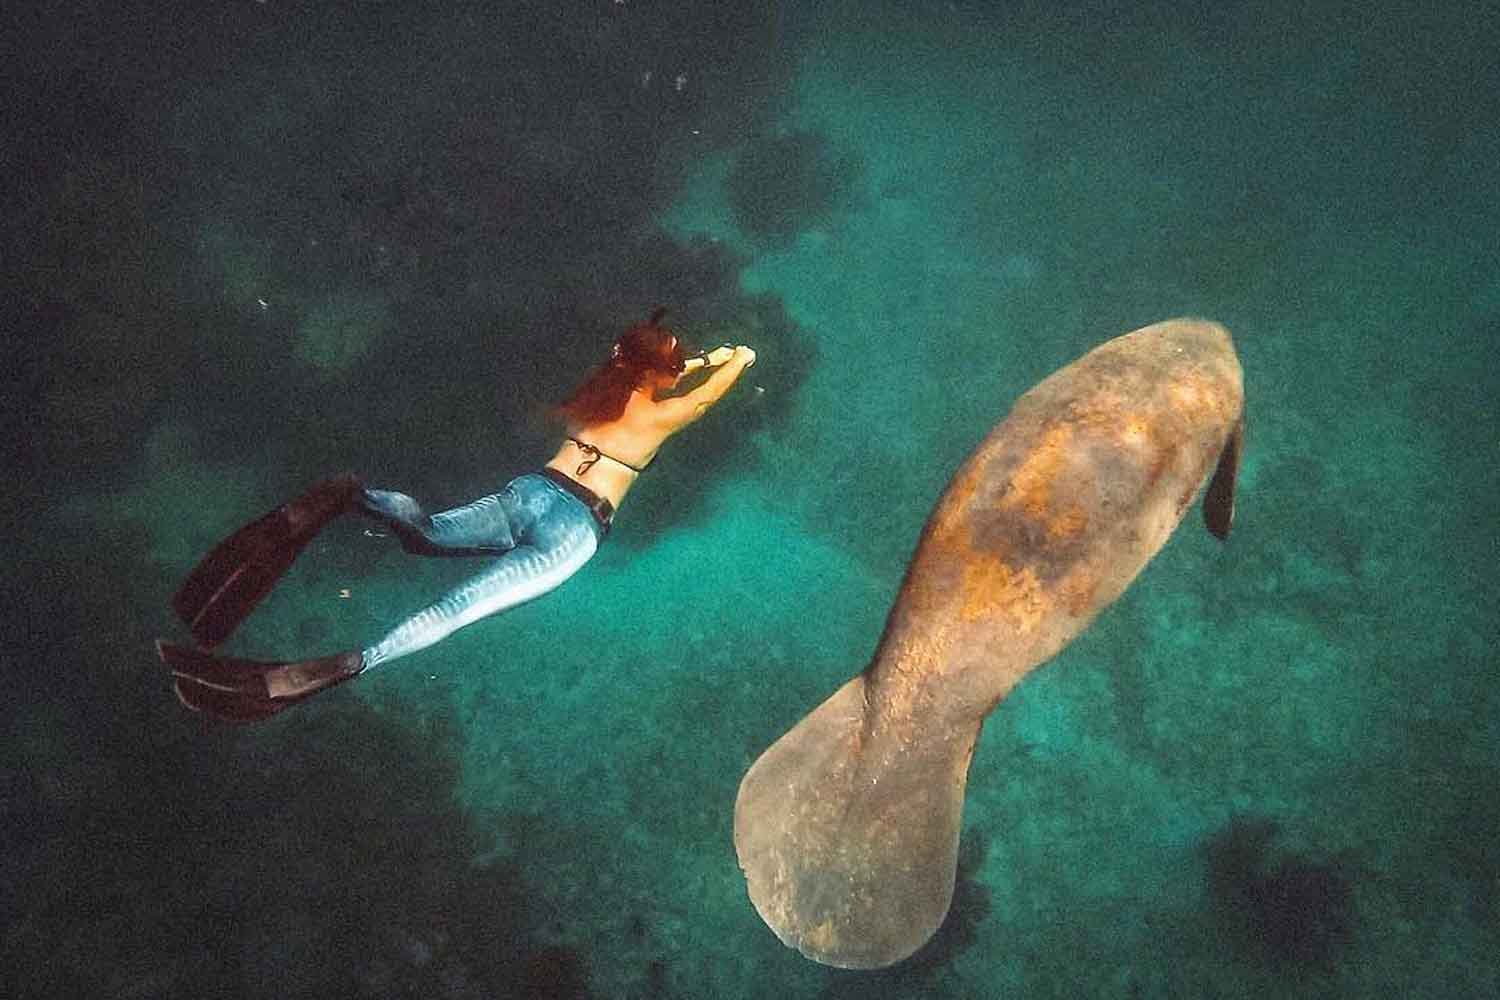 Aerial view looking down at a person swimming next to a manatee